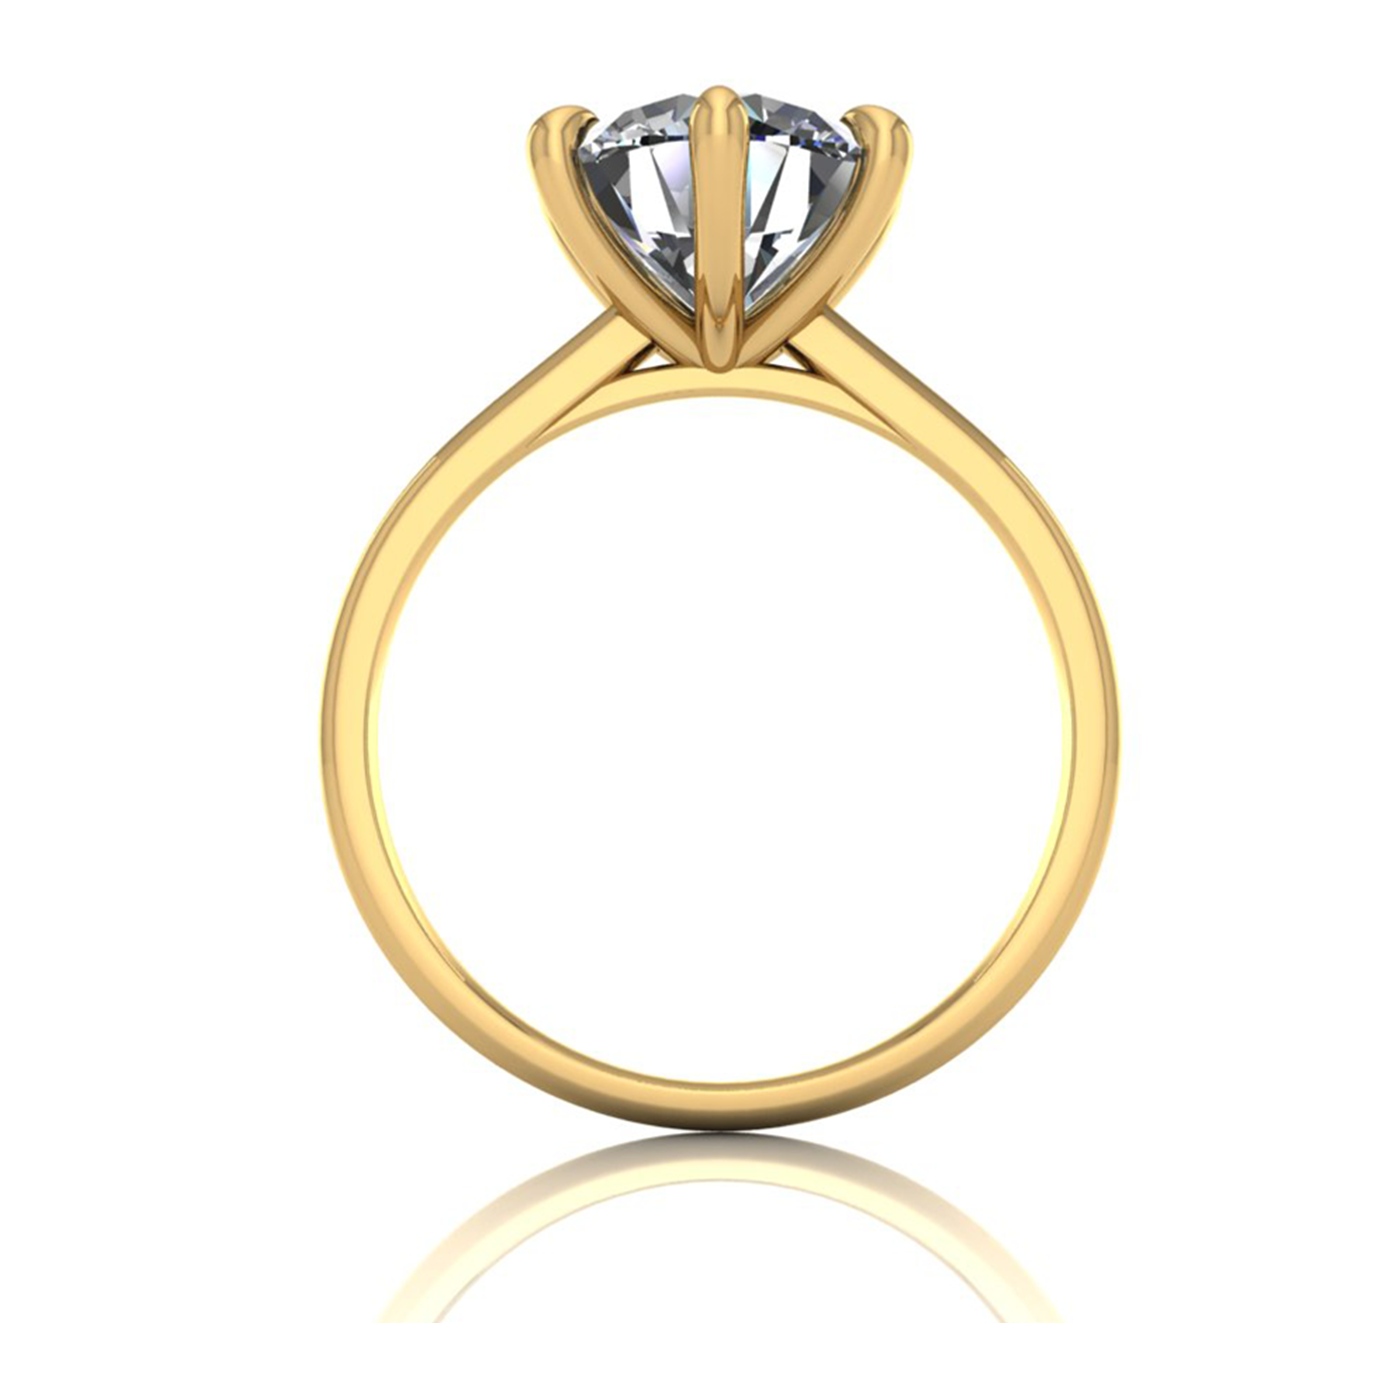 18k yellow gold 2,50 ct 6 prongs solitaire round cut diamond engagement ring with whisper thin band